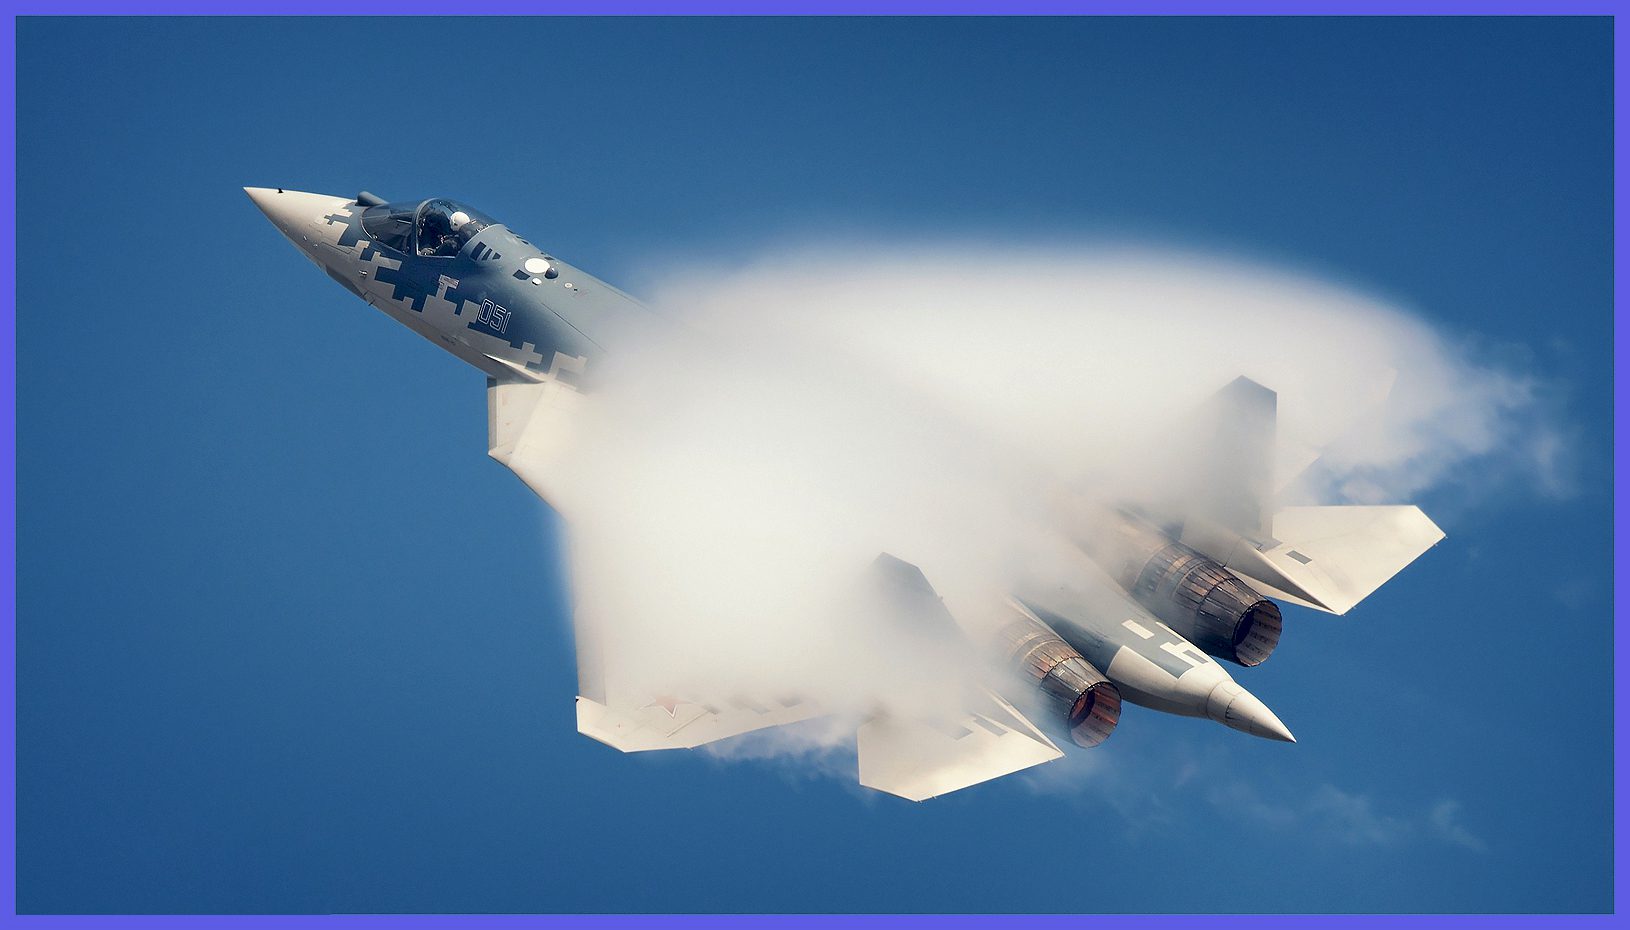 Photo Credit: Hesja Air-Art Photography / The Science of Spectacular Vapour Cone Phenomena / The fantastic vapor cone effects were observed during the August 31, 2019, MAKS airshow, featuring the Russian Air Force Sukhoihttps://airpra.com/discover-the-best-of-russian-stealth-su-57-felon/.